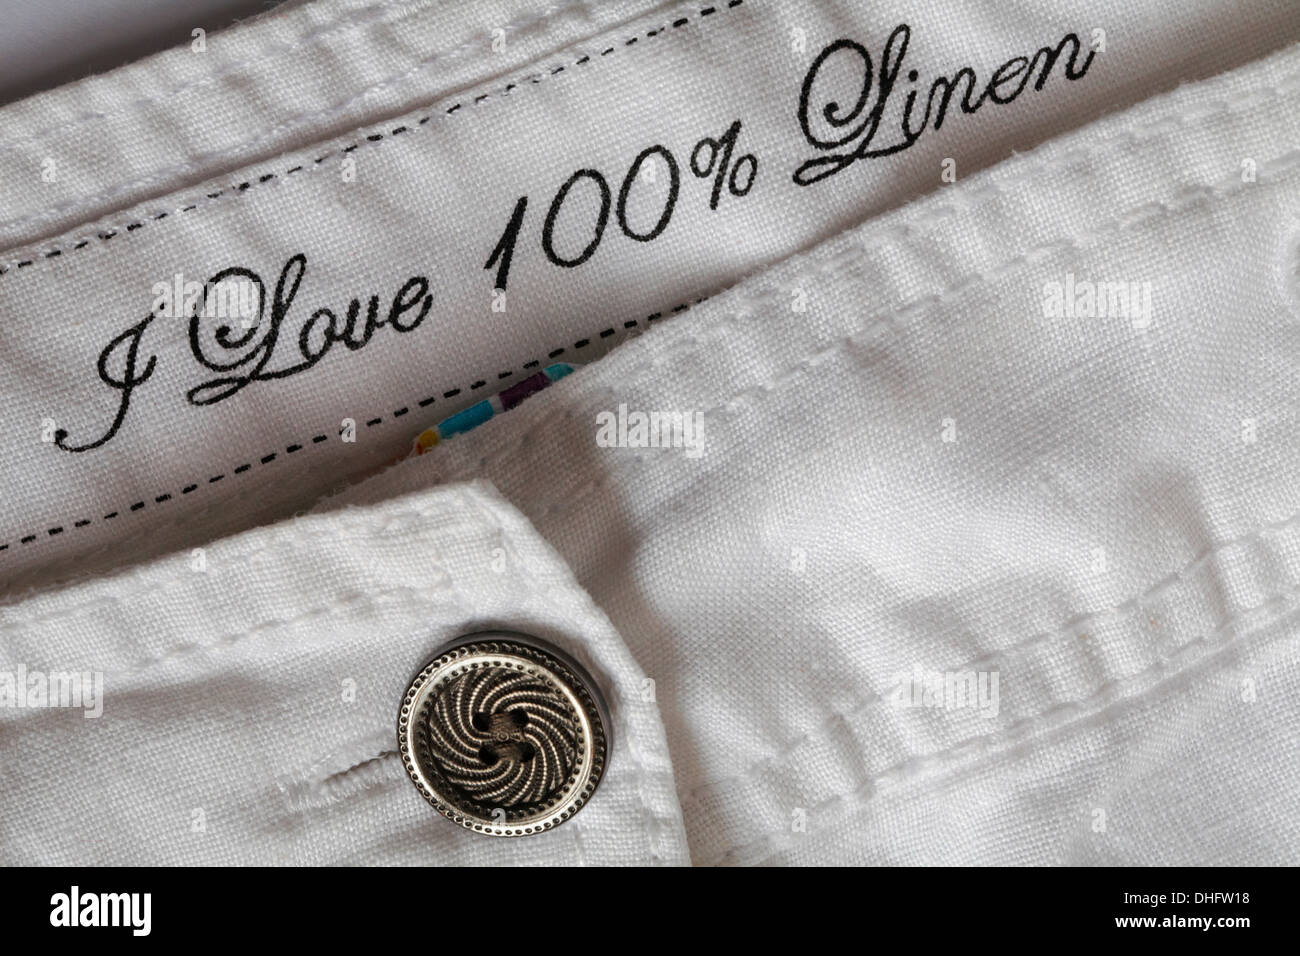 I Love 100% Linen on waistband of white trousers Stock Photo